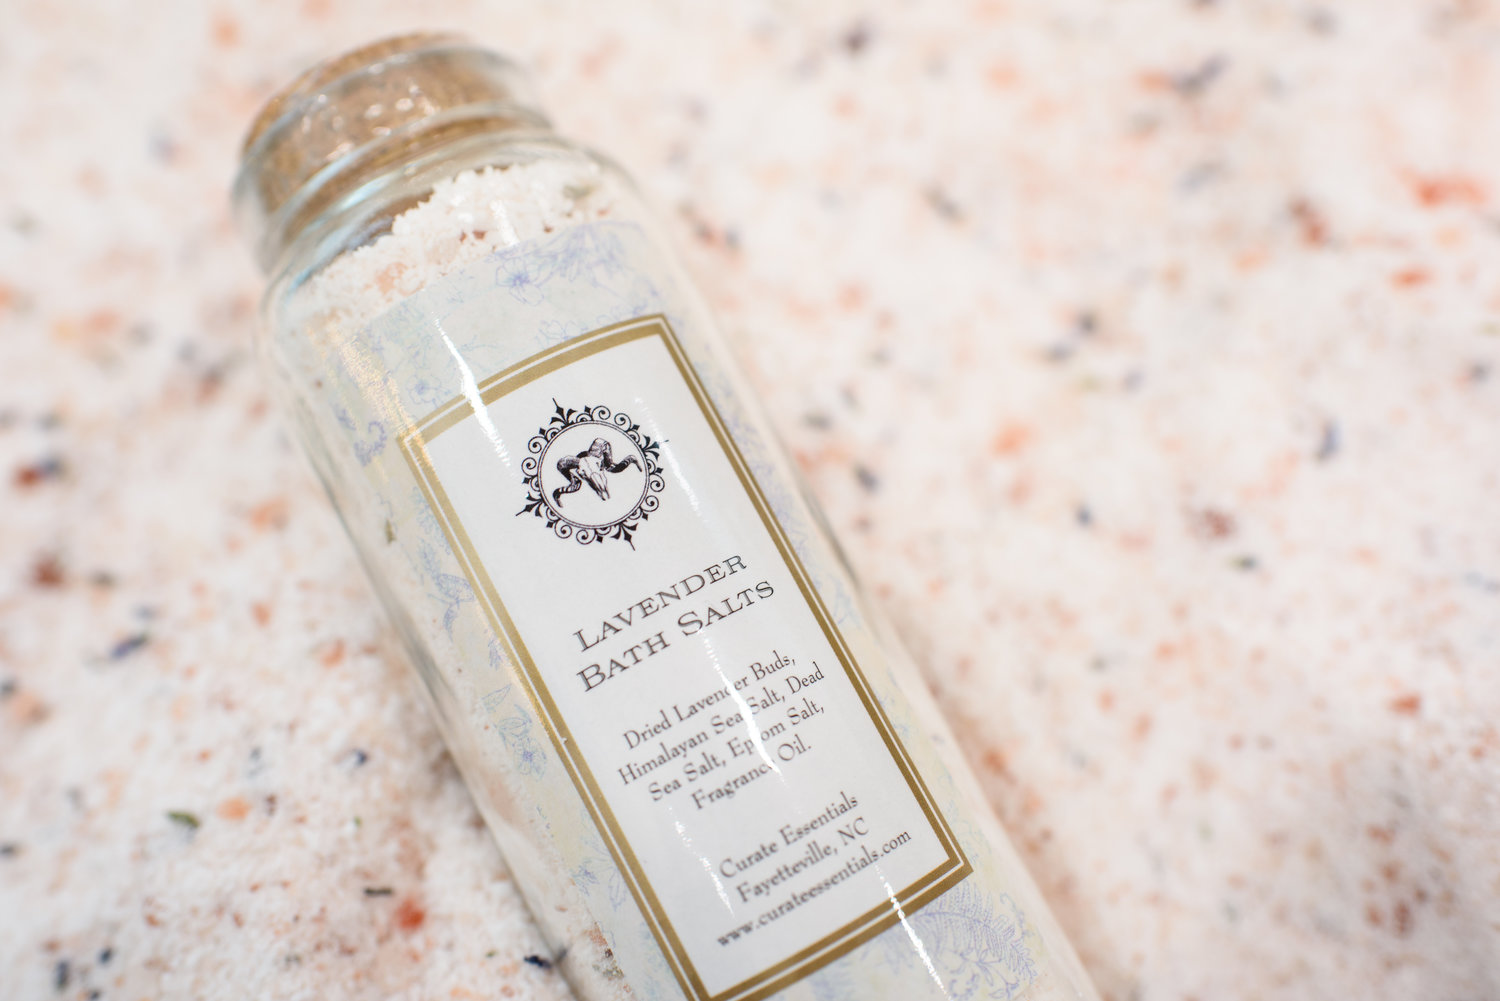 Lavender bath salts are available at Curate Essentials in Haymount.